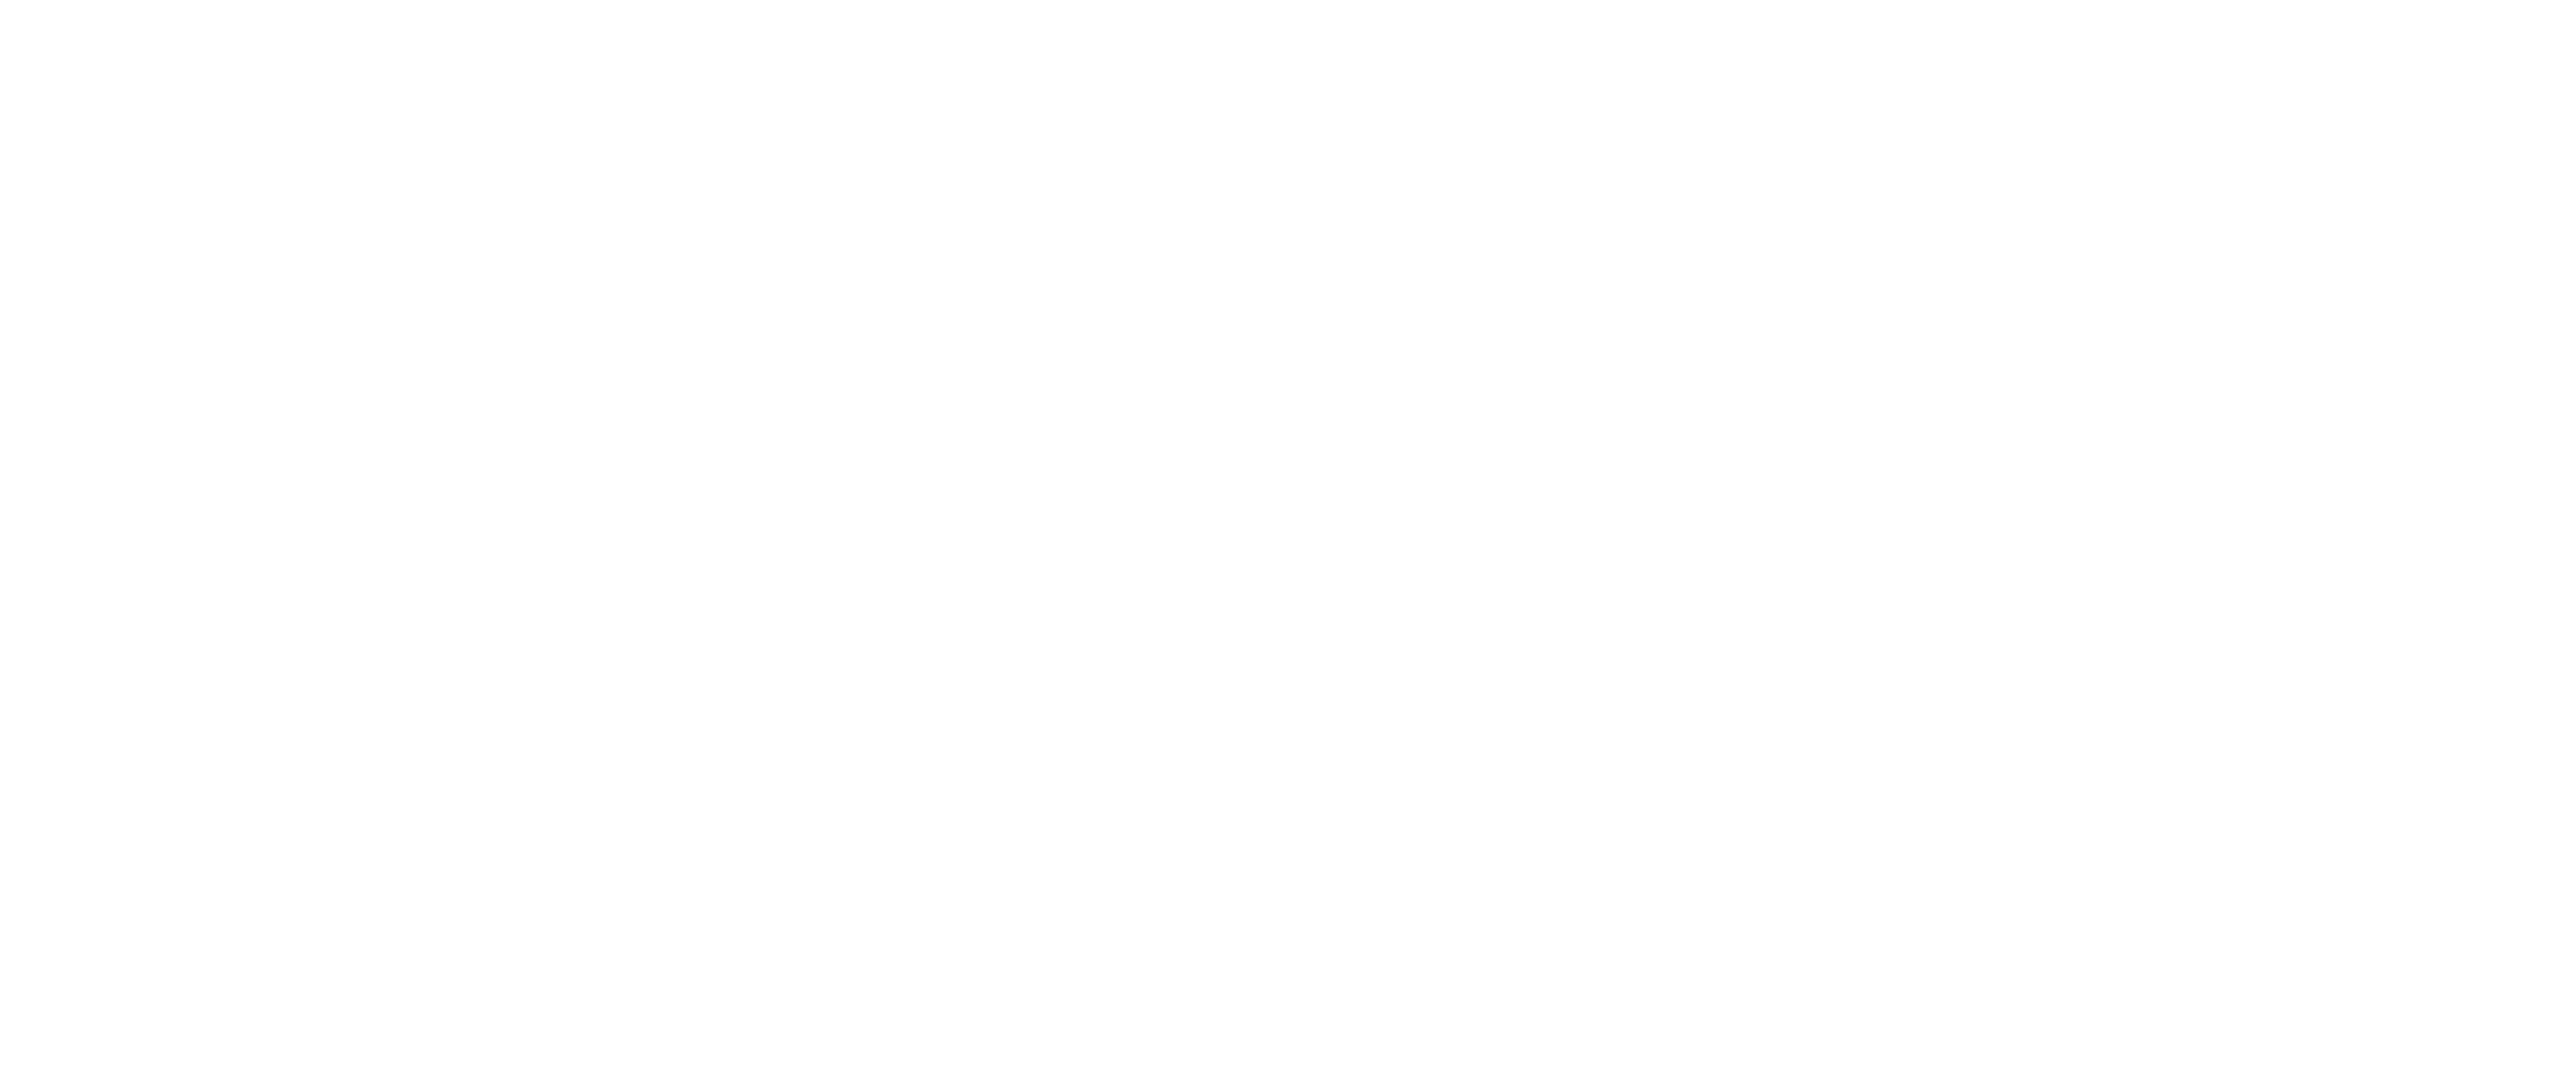 The Bachelor Party logo